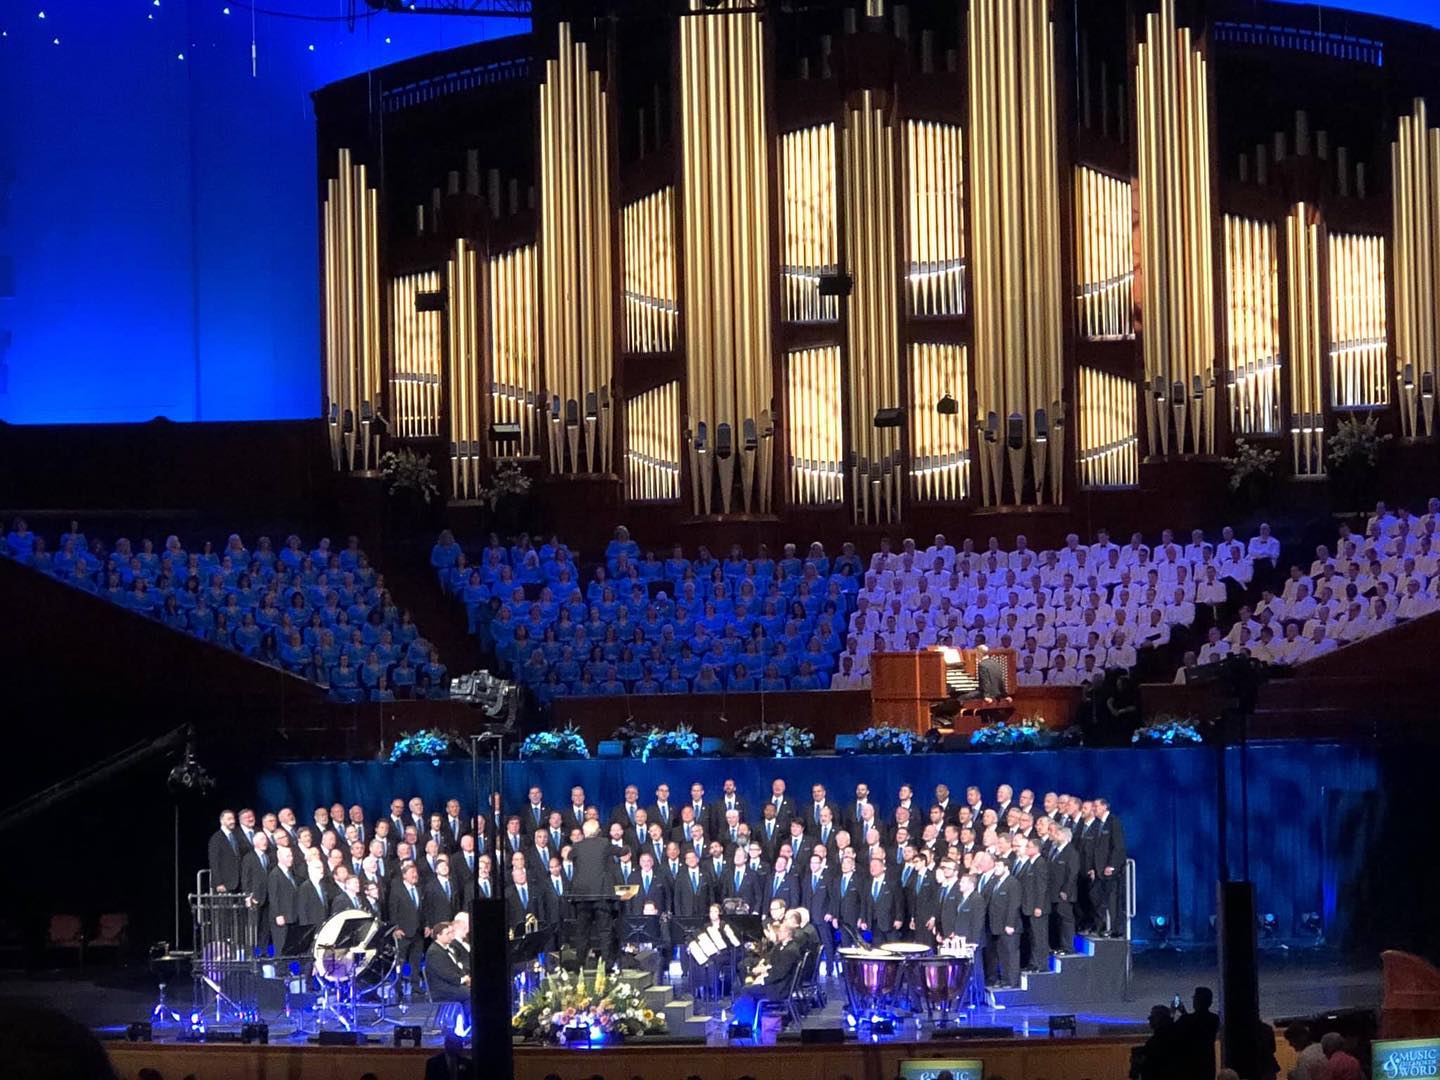 The Tabernacle Choir and the Vocal Majority, July 7, 2019, Salt Lake City